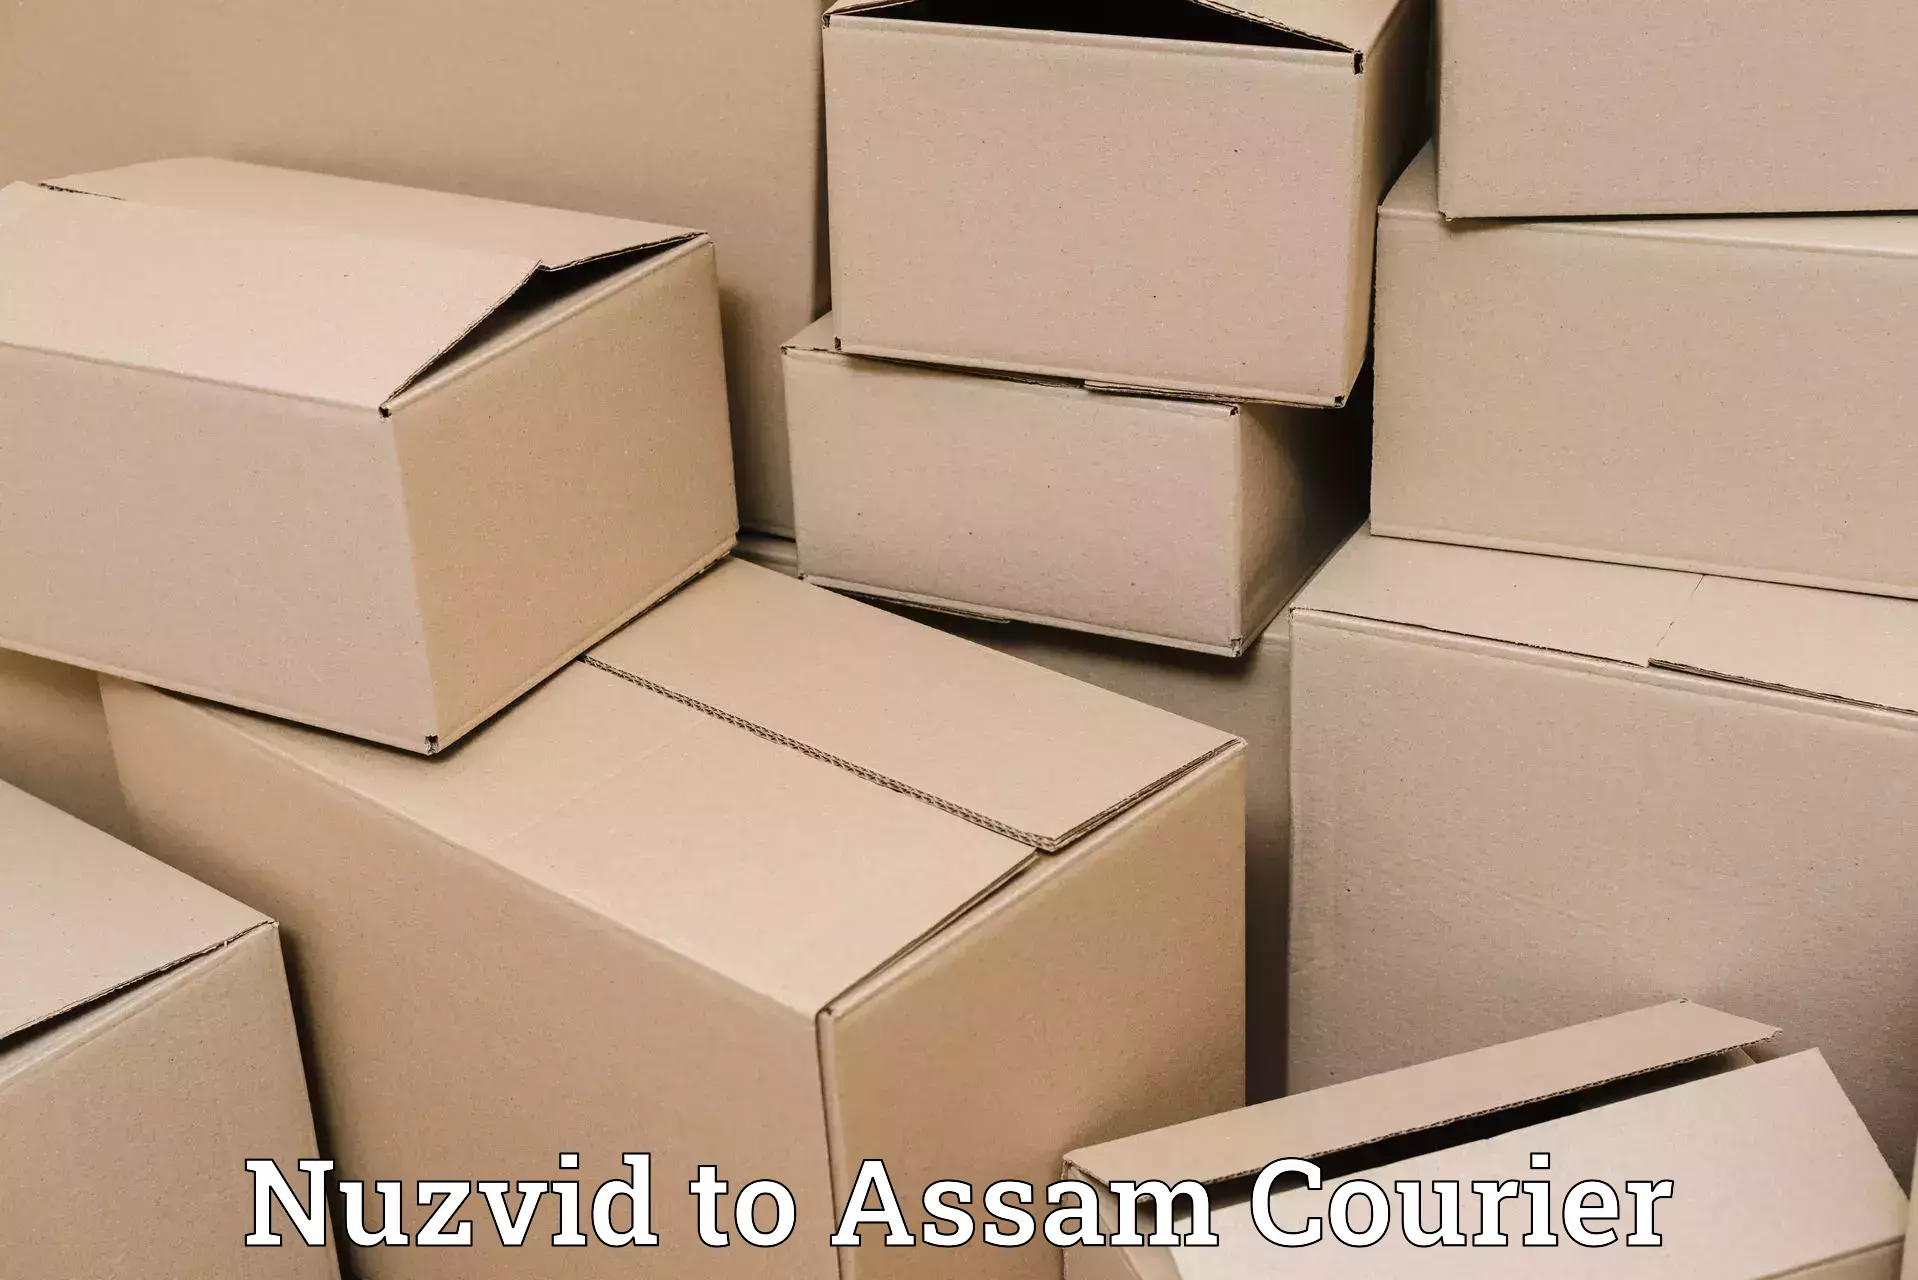 Cash on delivery service Nuzvid to Assam